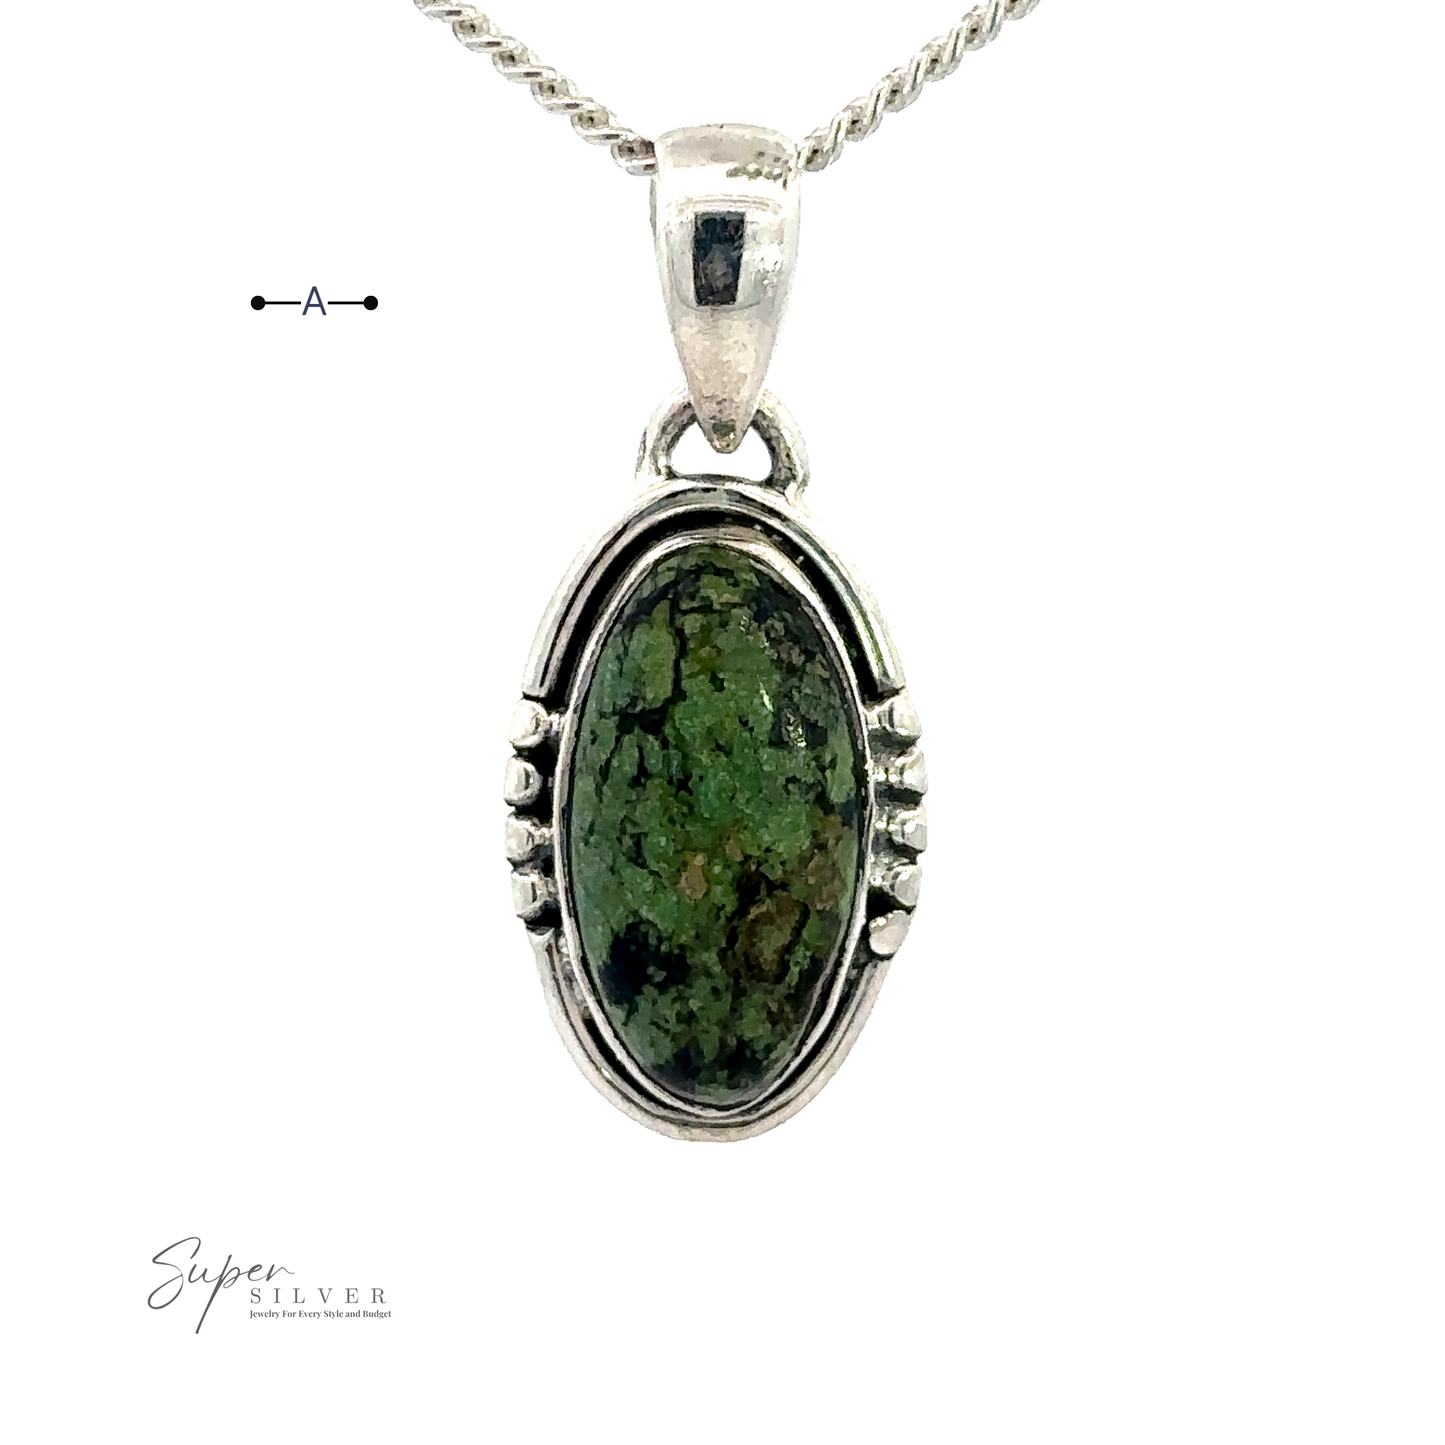 An oval-shaped green gemstone pendant set in handmade sterling silver with intricate details, hanging from a silver chain. The image also includes the "Super Silver" brand logo. 

Updated Sentence: A Natural Turquoise Elongated Oval Pendant set in handmade sterling silver with intricate details, hanging from a silver chain. The image also includes the "Super Silver" brand logo.